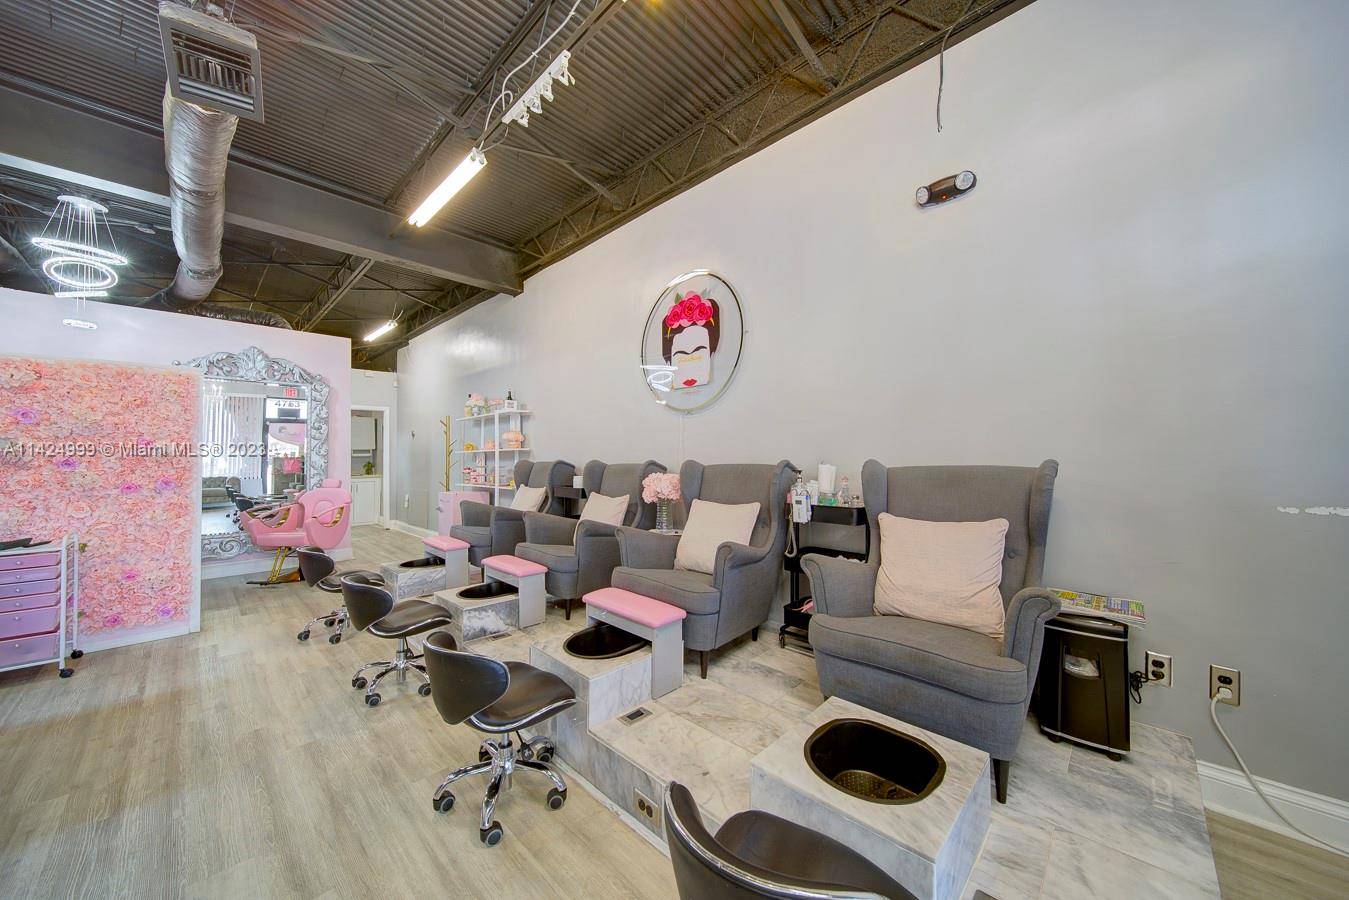 Newly renovated Miami Gardens nail salon for sale, featuring low rent below market rates.